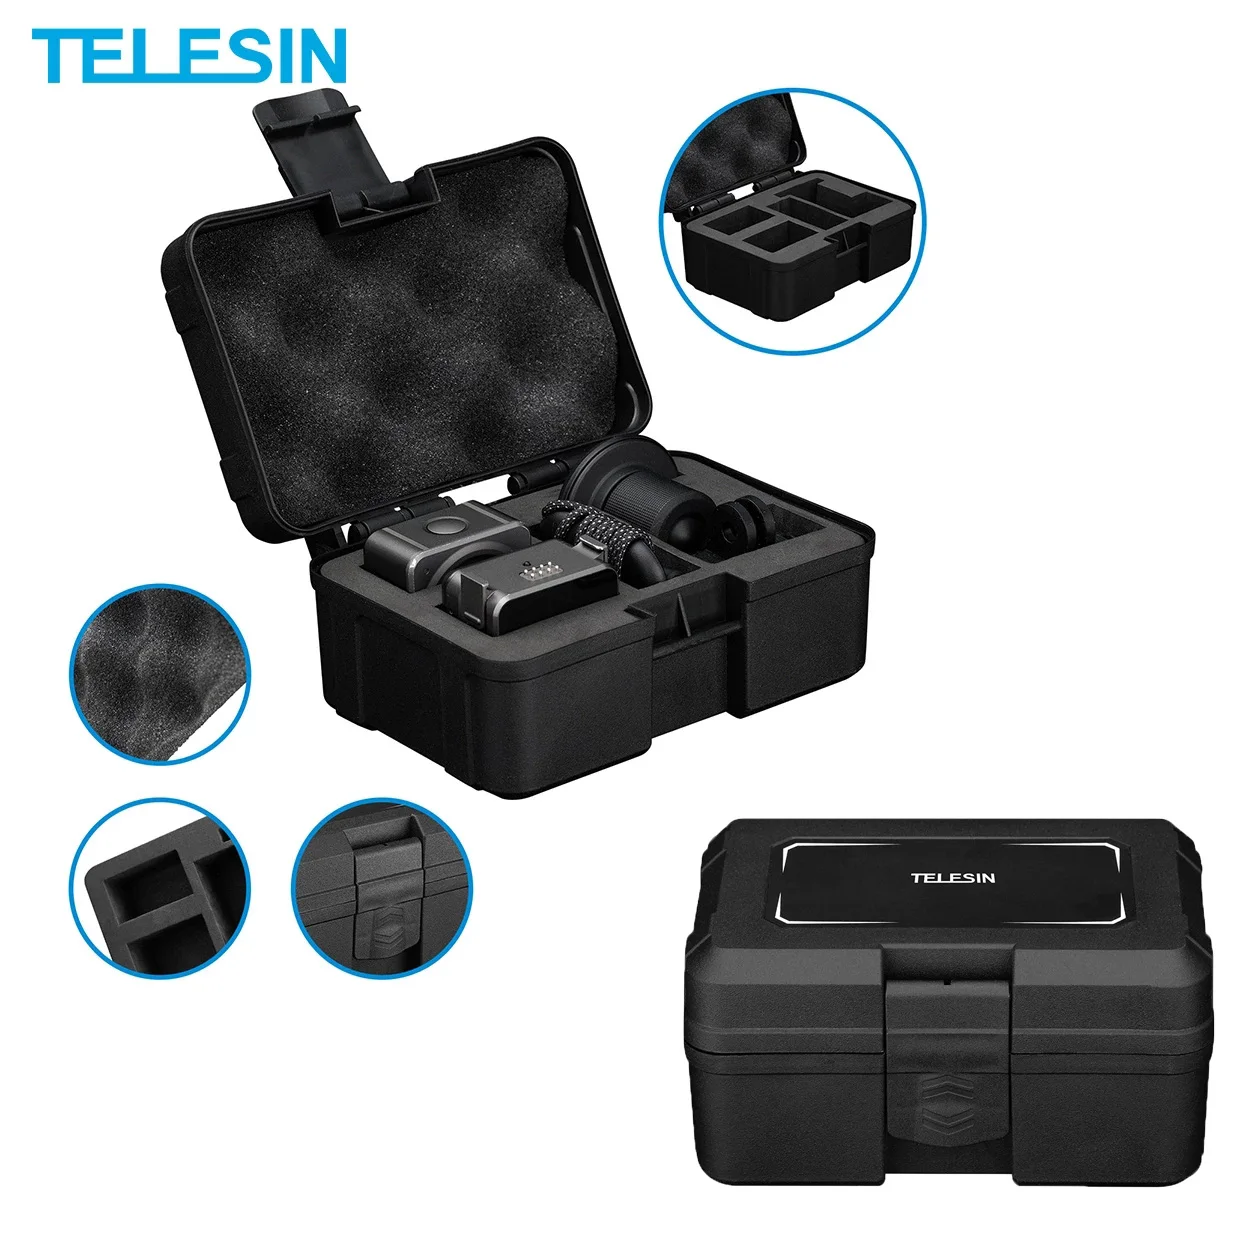 TELESIN DJI Action 2 Hard Storage Case Portable Shockproof Bag High Temperature Resistant Protector Box For DJI Action 2 Parts